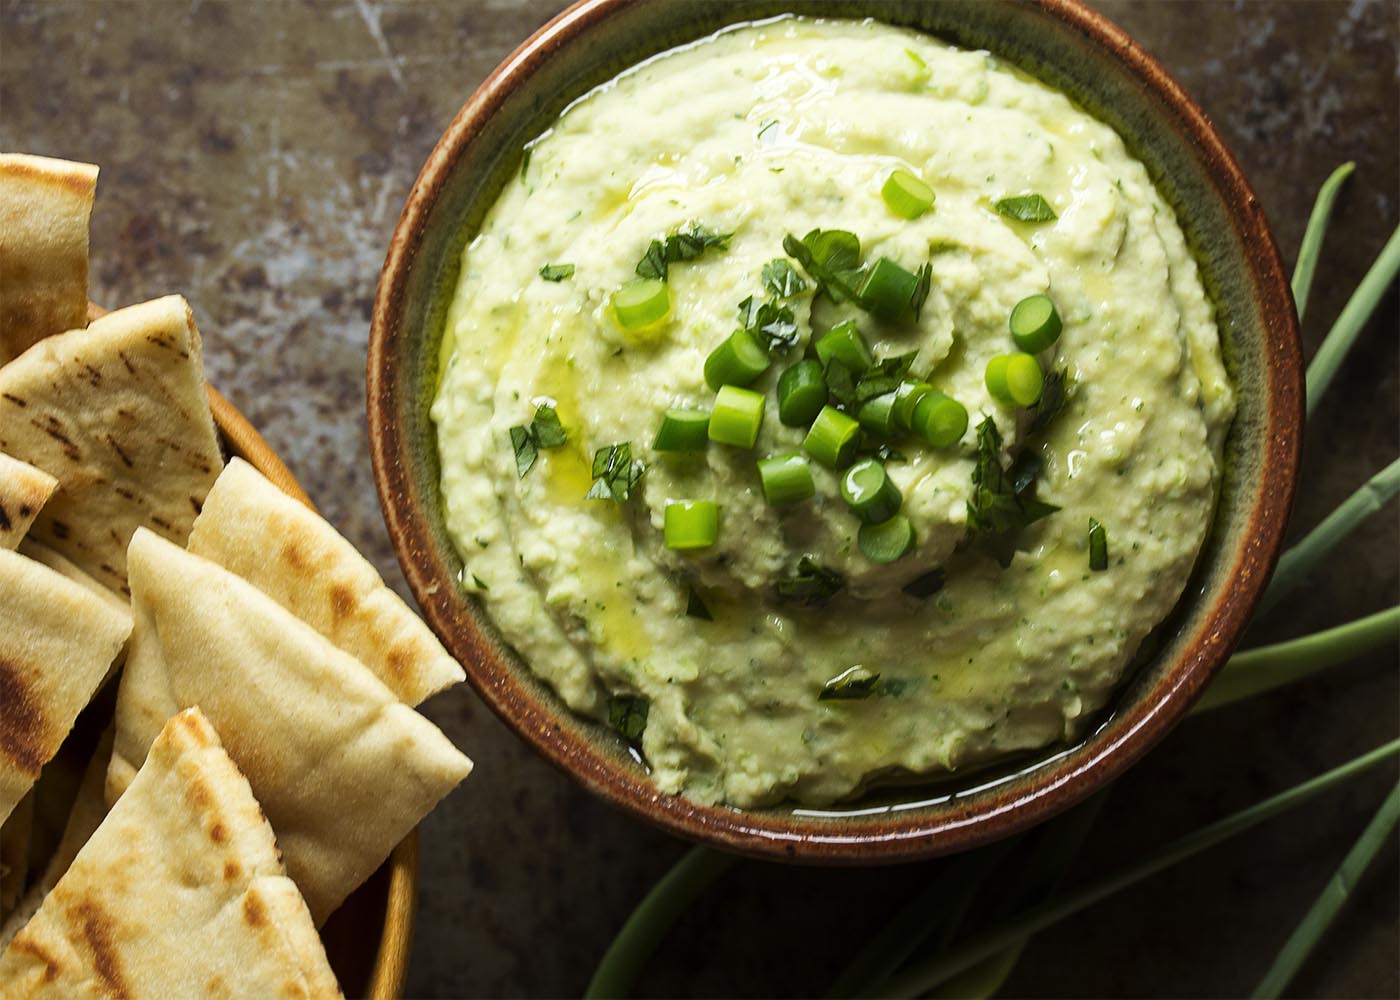 Wondering what to do with garlic scapes? Puree them into a quick and creamy, garlicky bean and garlic scape dip! Great as a healthy snack or for a party! | justalittlebitofbacon.com